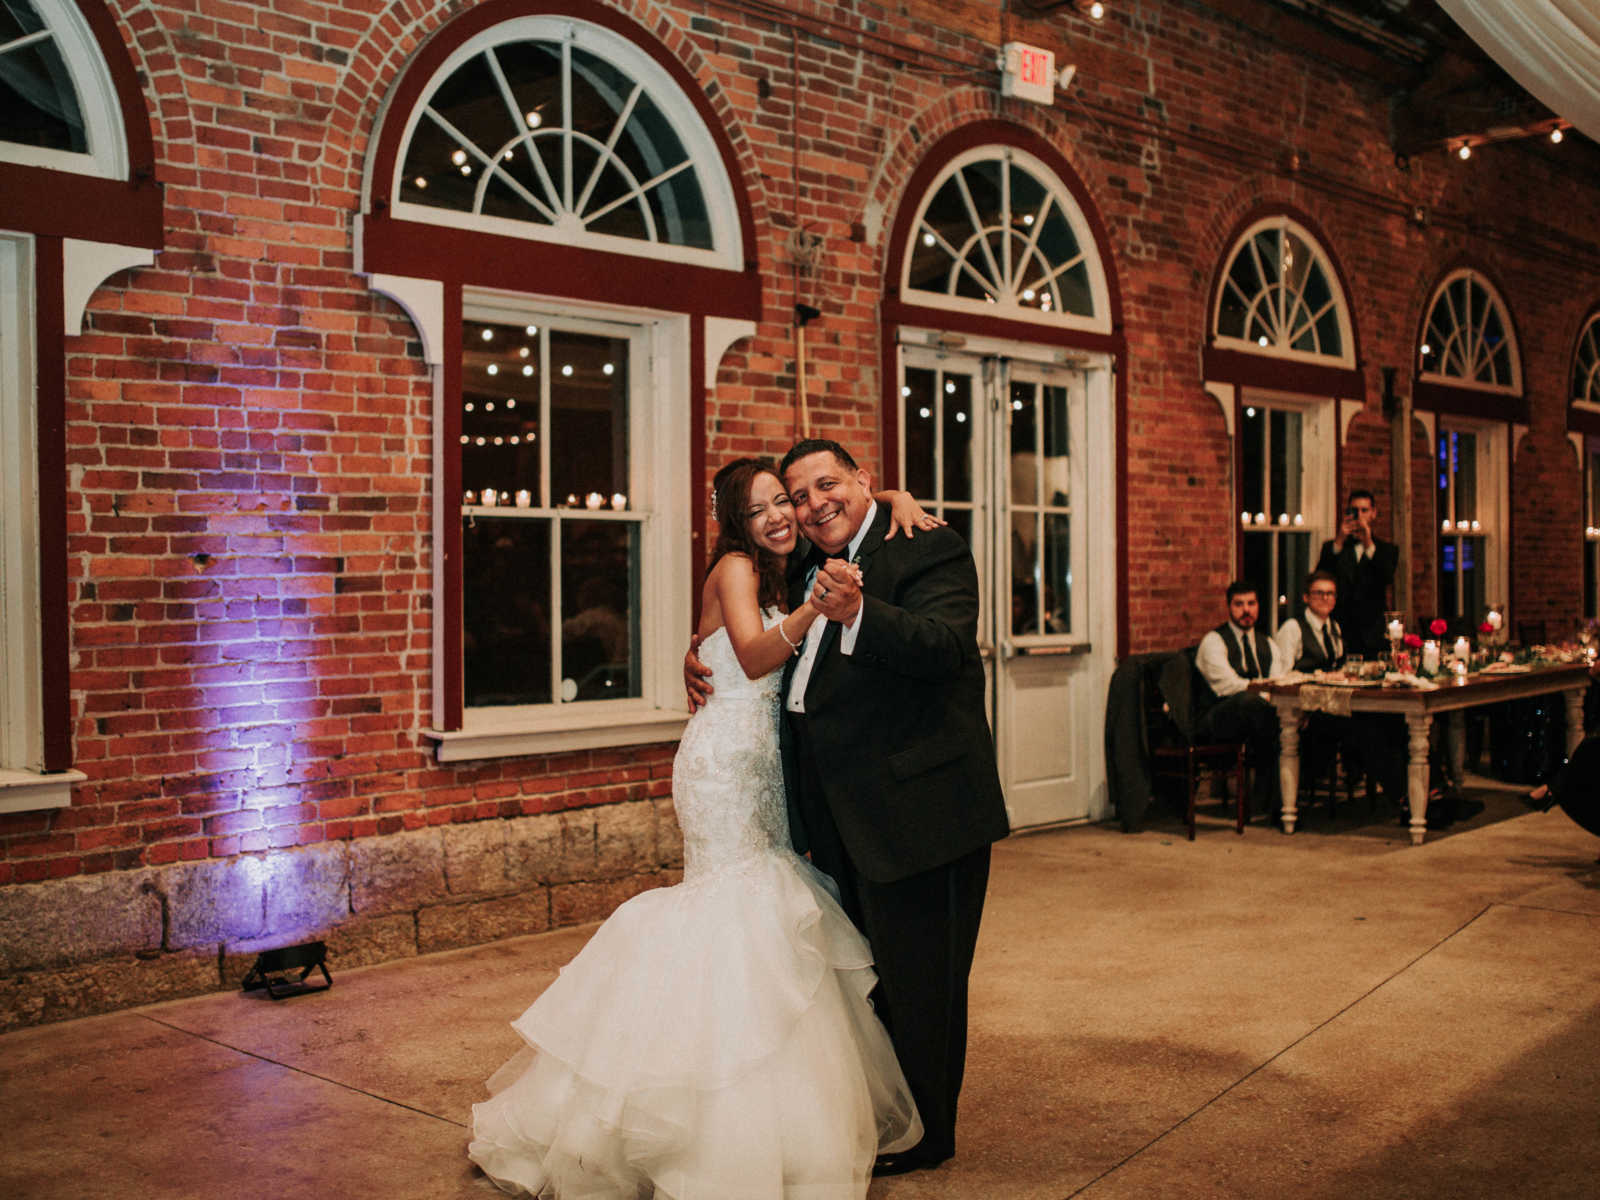 Father and daughter share dance at wedding reception